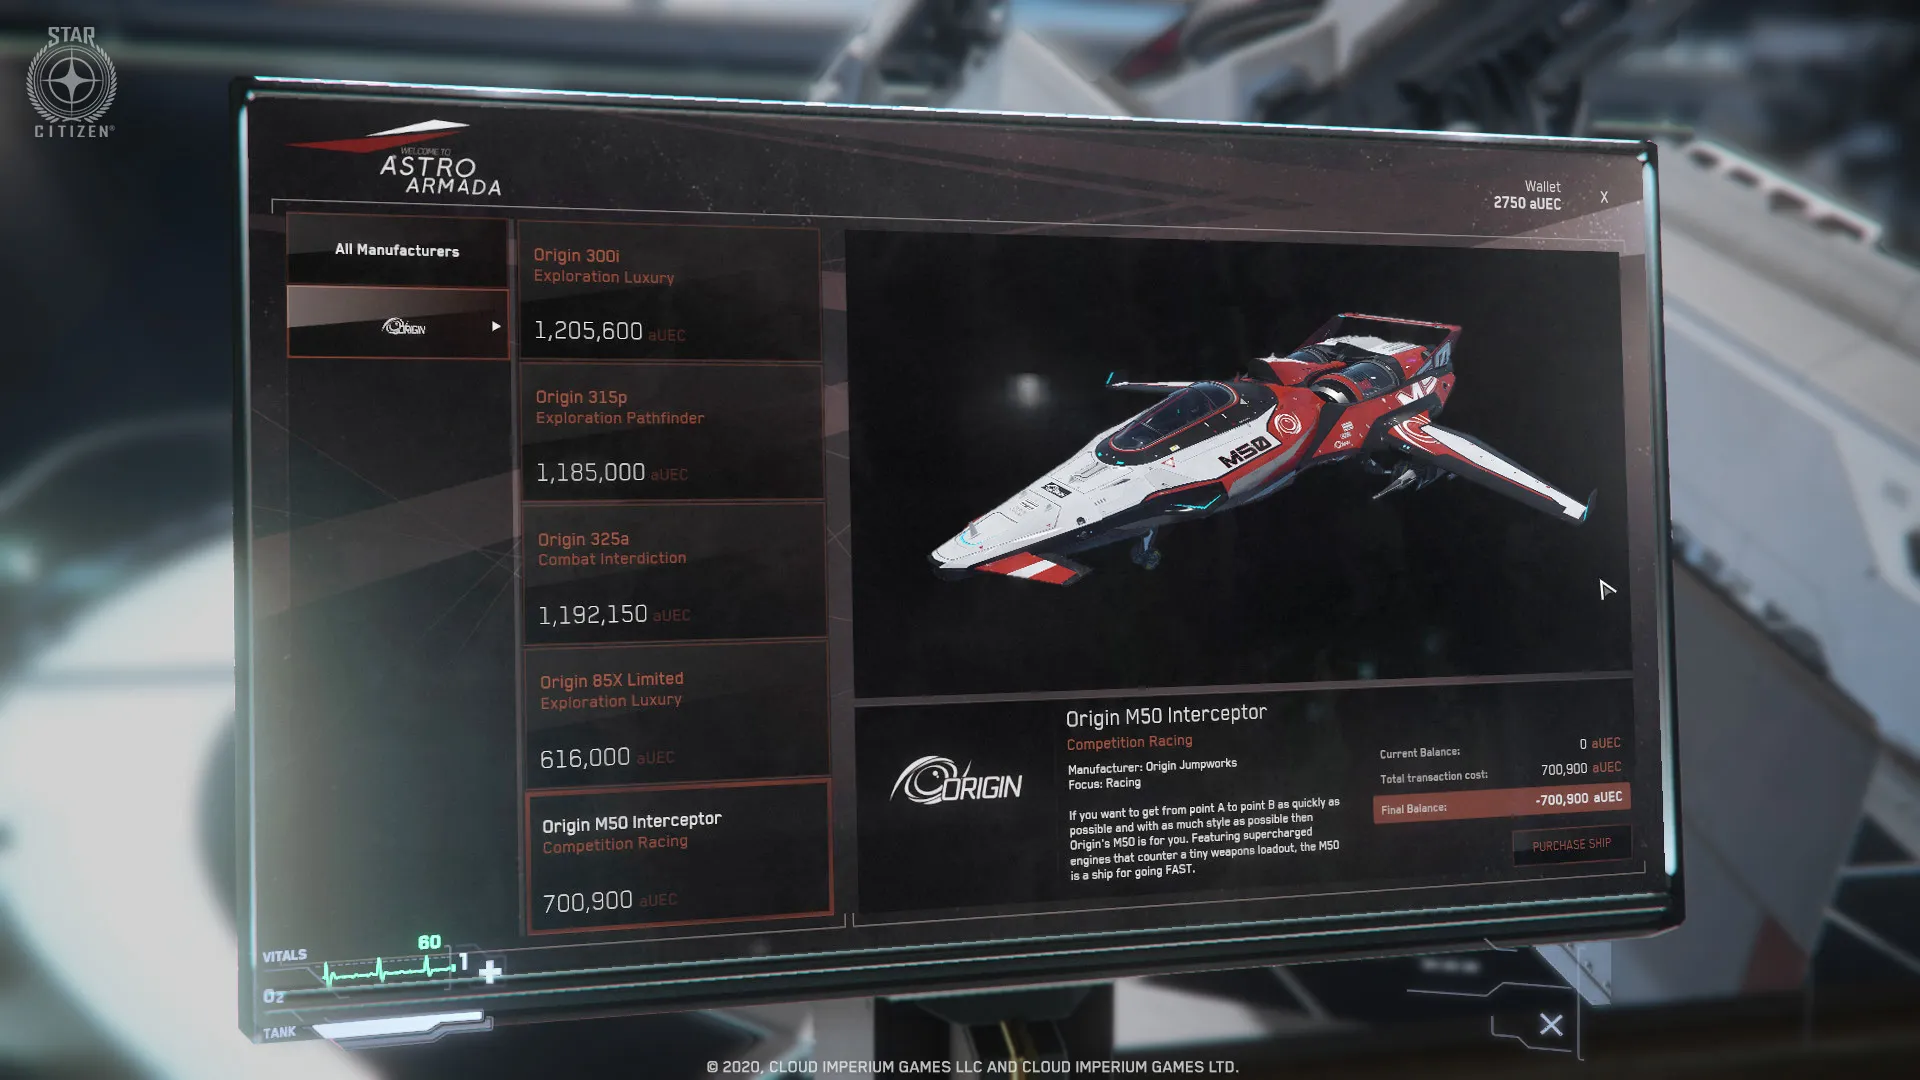 What Can You Actually Do In Star Citizen? Here's What You Need to Know